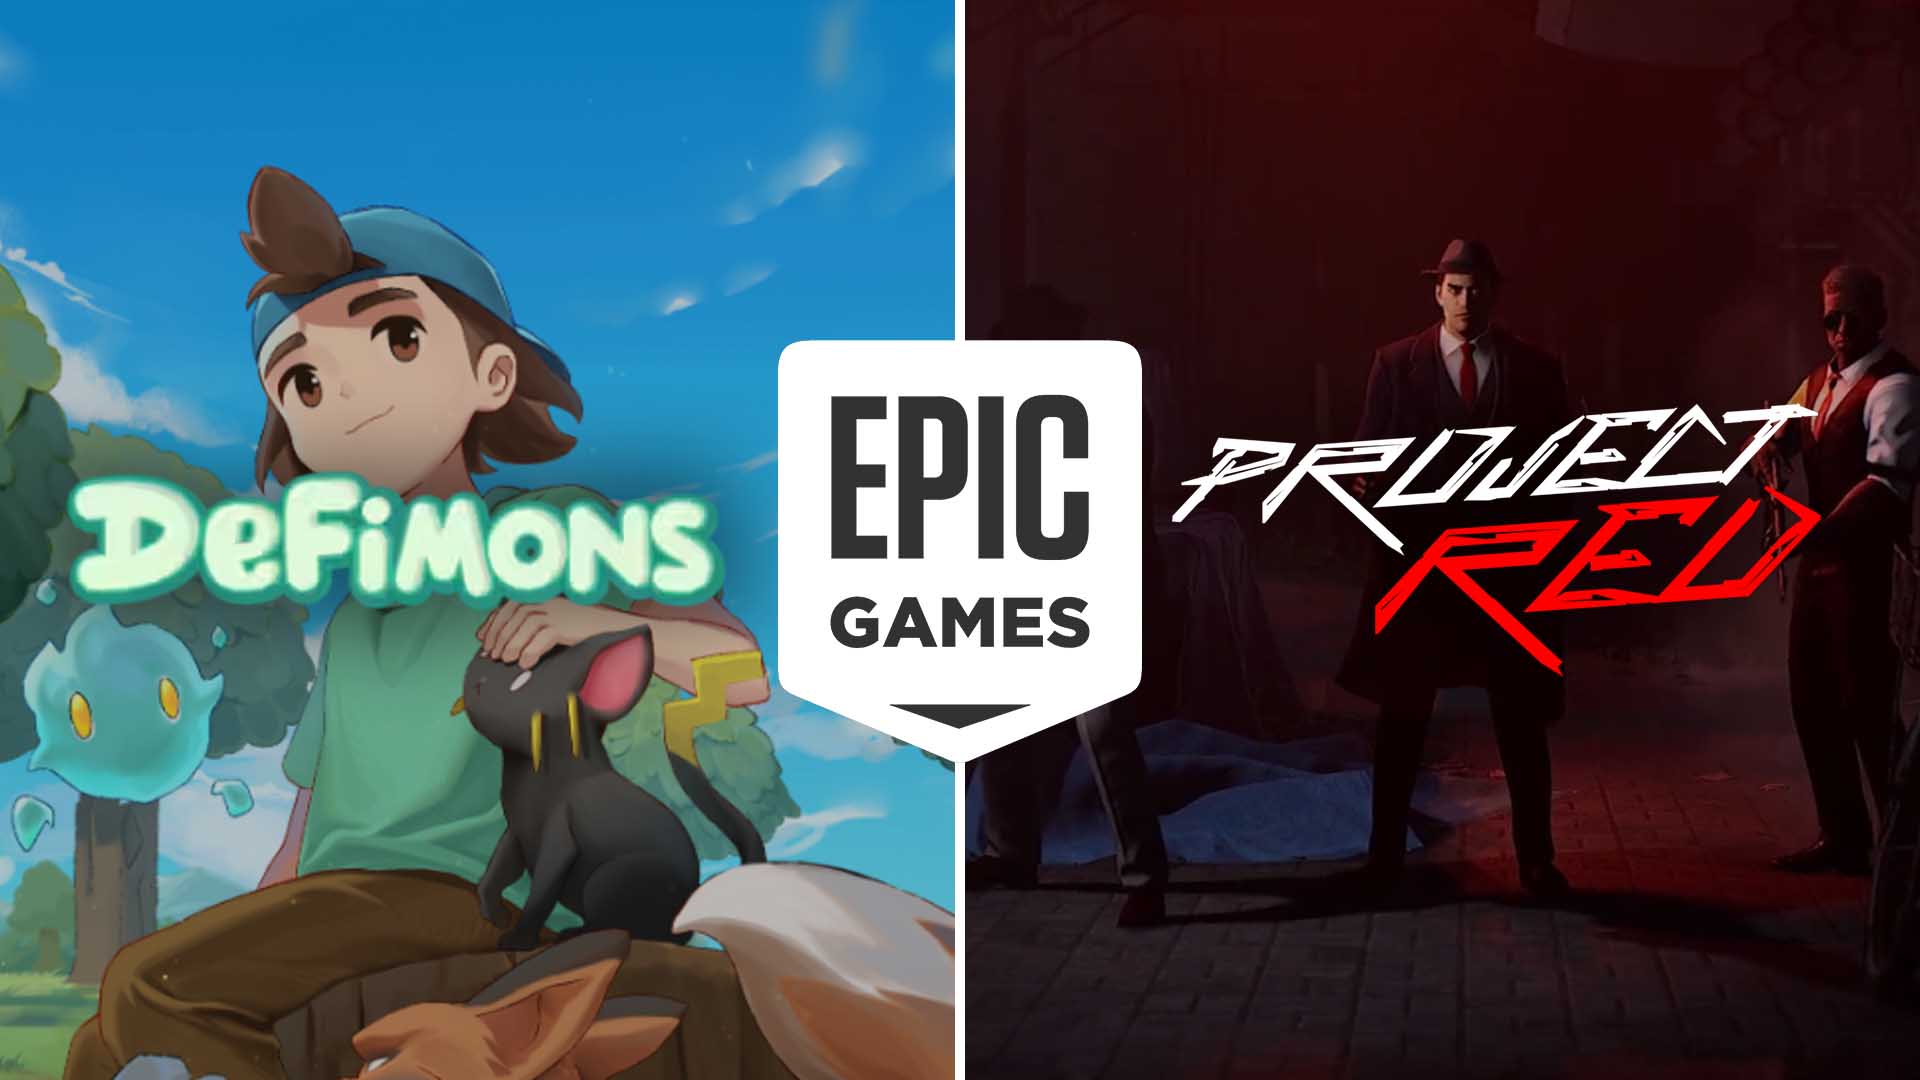 Epic Games Store Adds 20 NFT And Blockchain Games - Play to Earn Games News